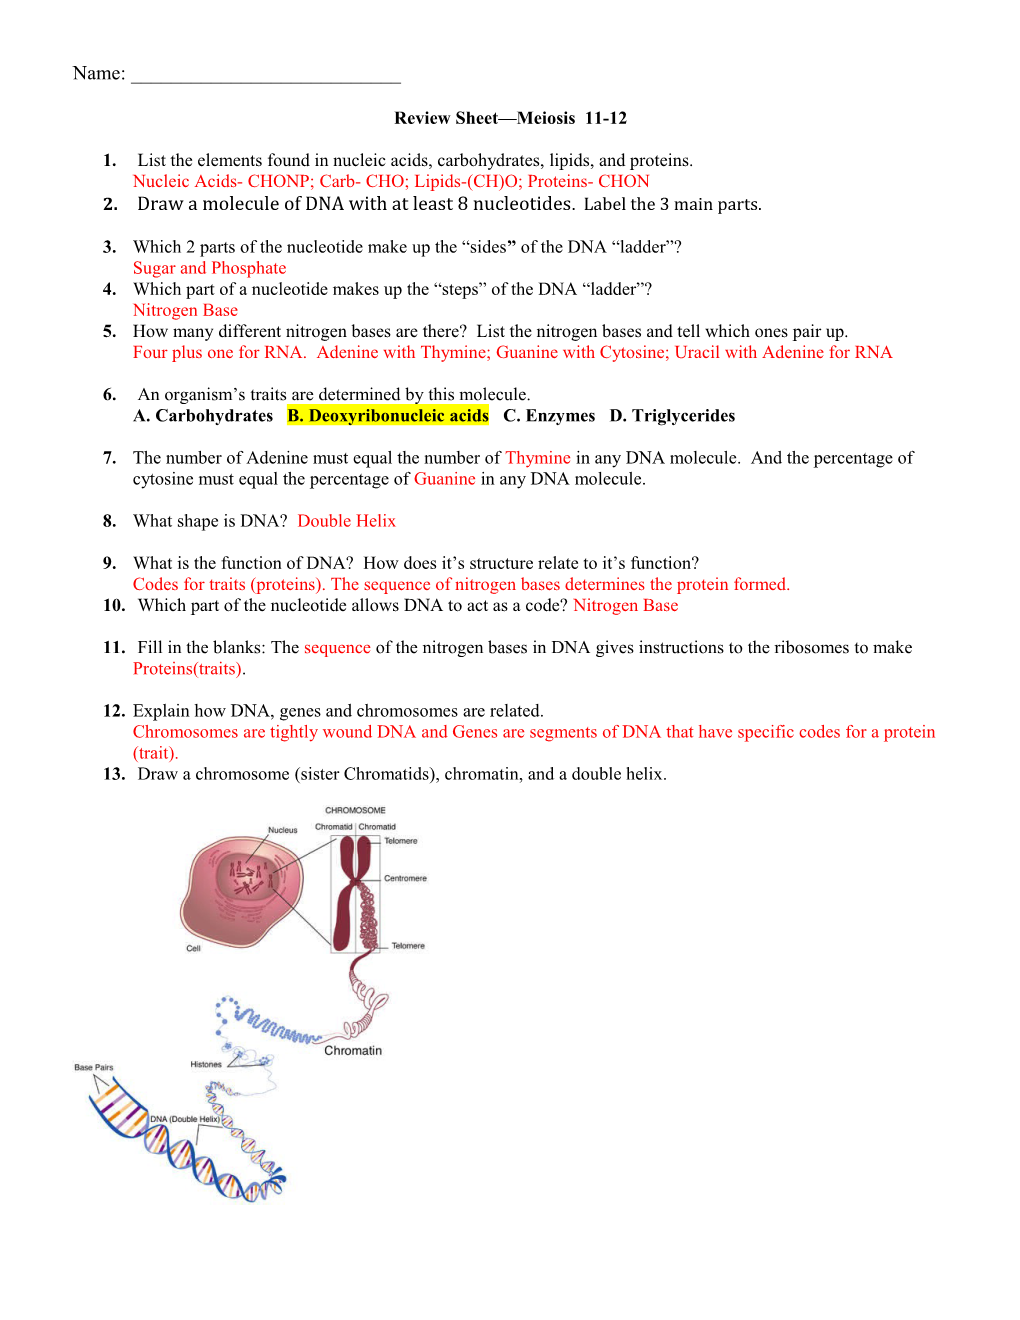 Review Sheet Cell Division